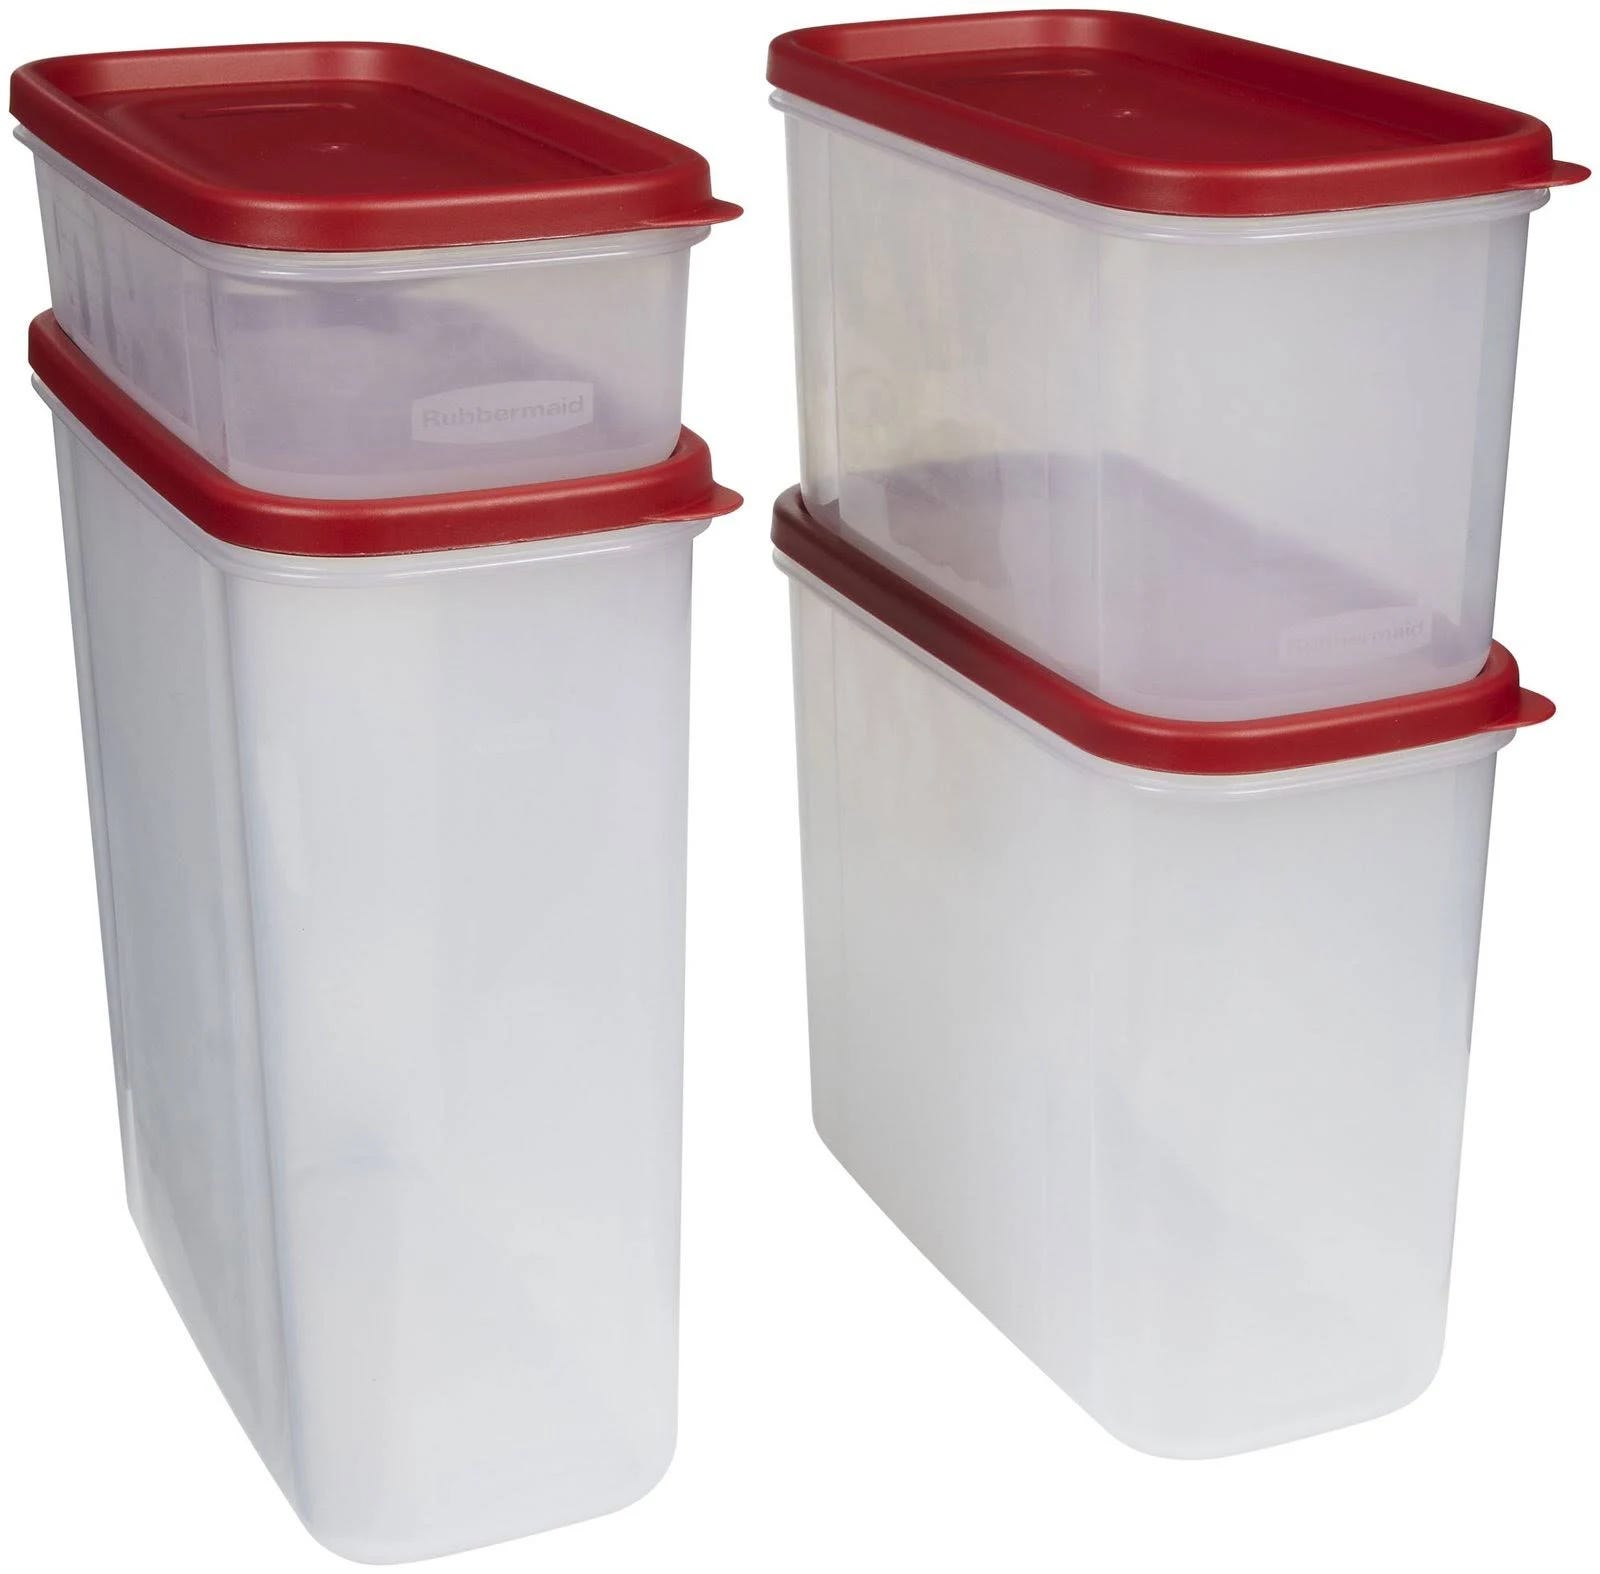 Rubbermaid Set: 8-Piece Dry Food Organizing Containers with Secure Seals and Stackable Design | Image